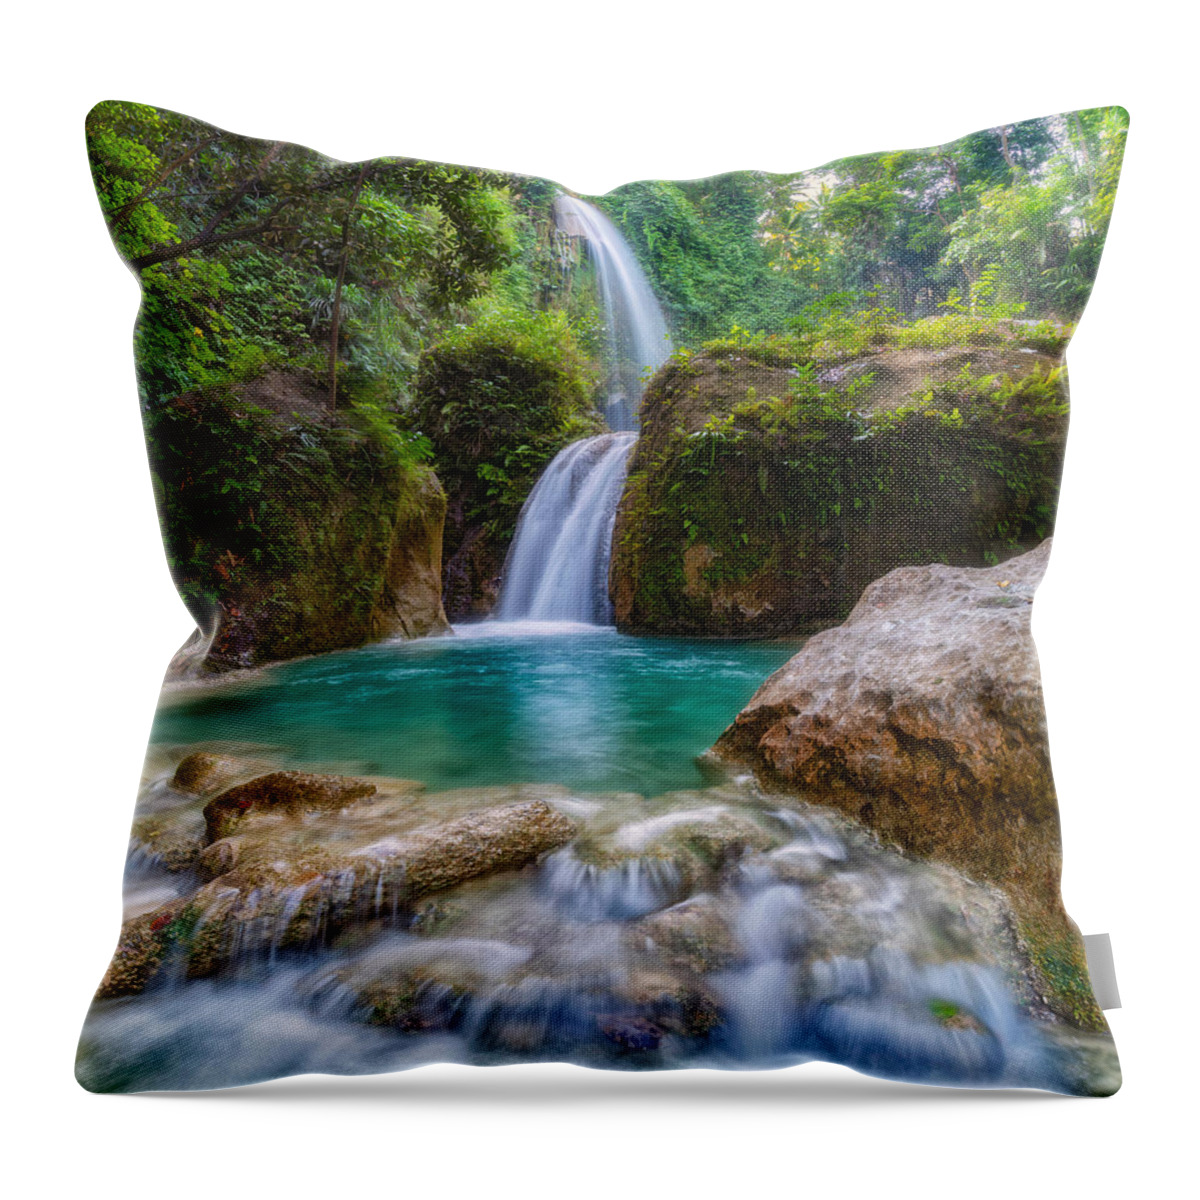 Waterfalls Throw Pillow featuring the photograph Refreshed by Russell Pugh